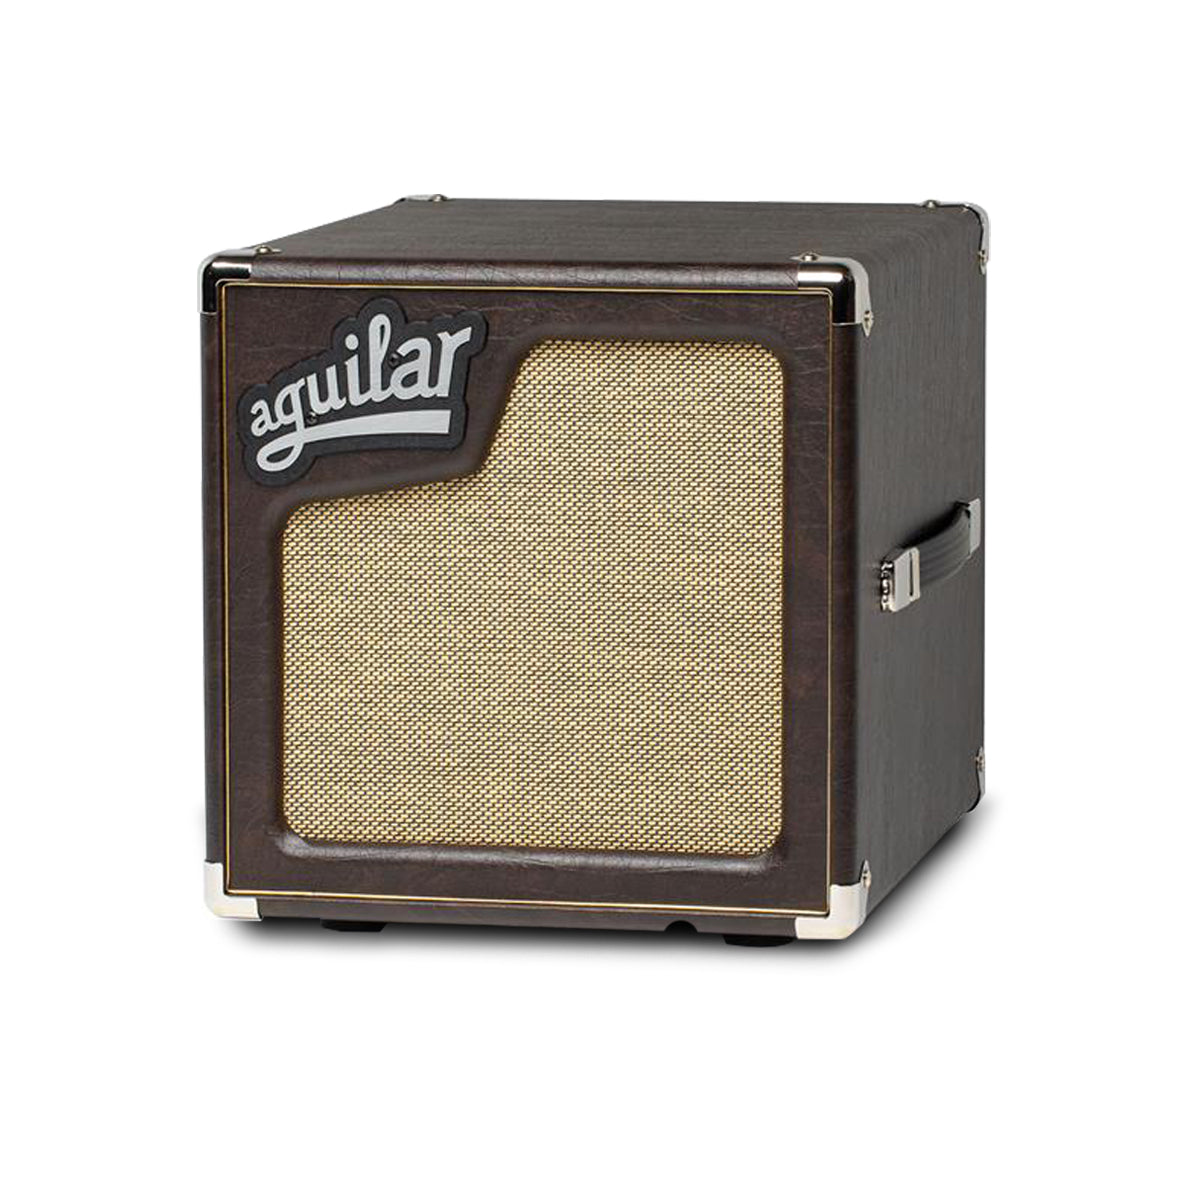 Aguilar SL110 chocolate brown bass cabinet front